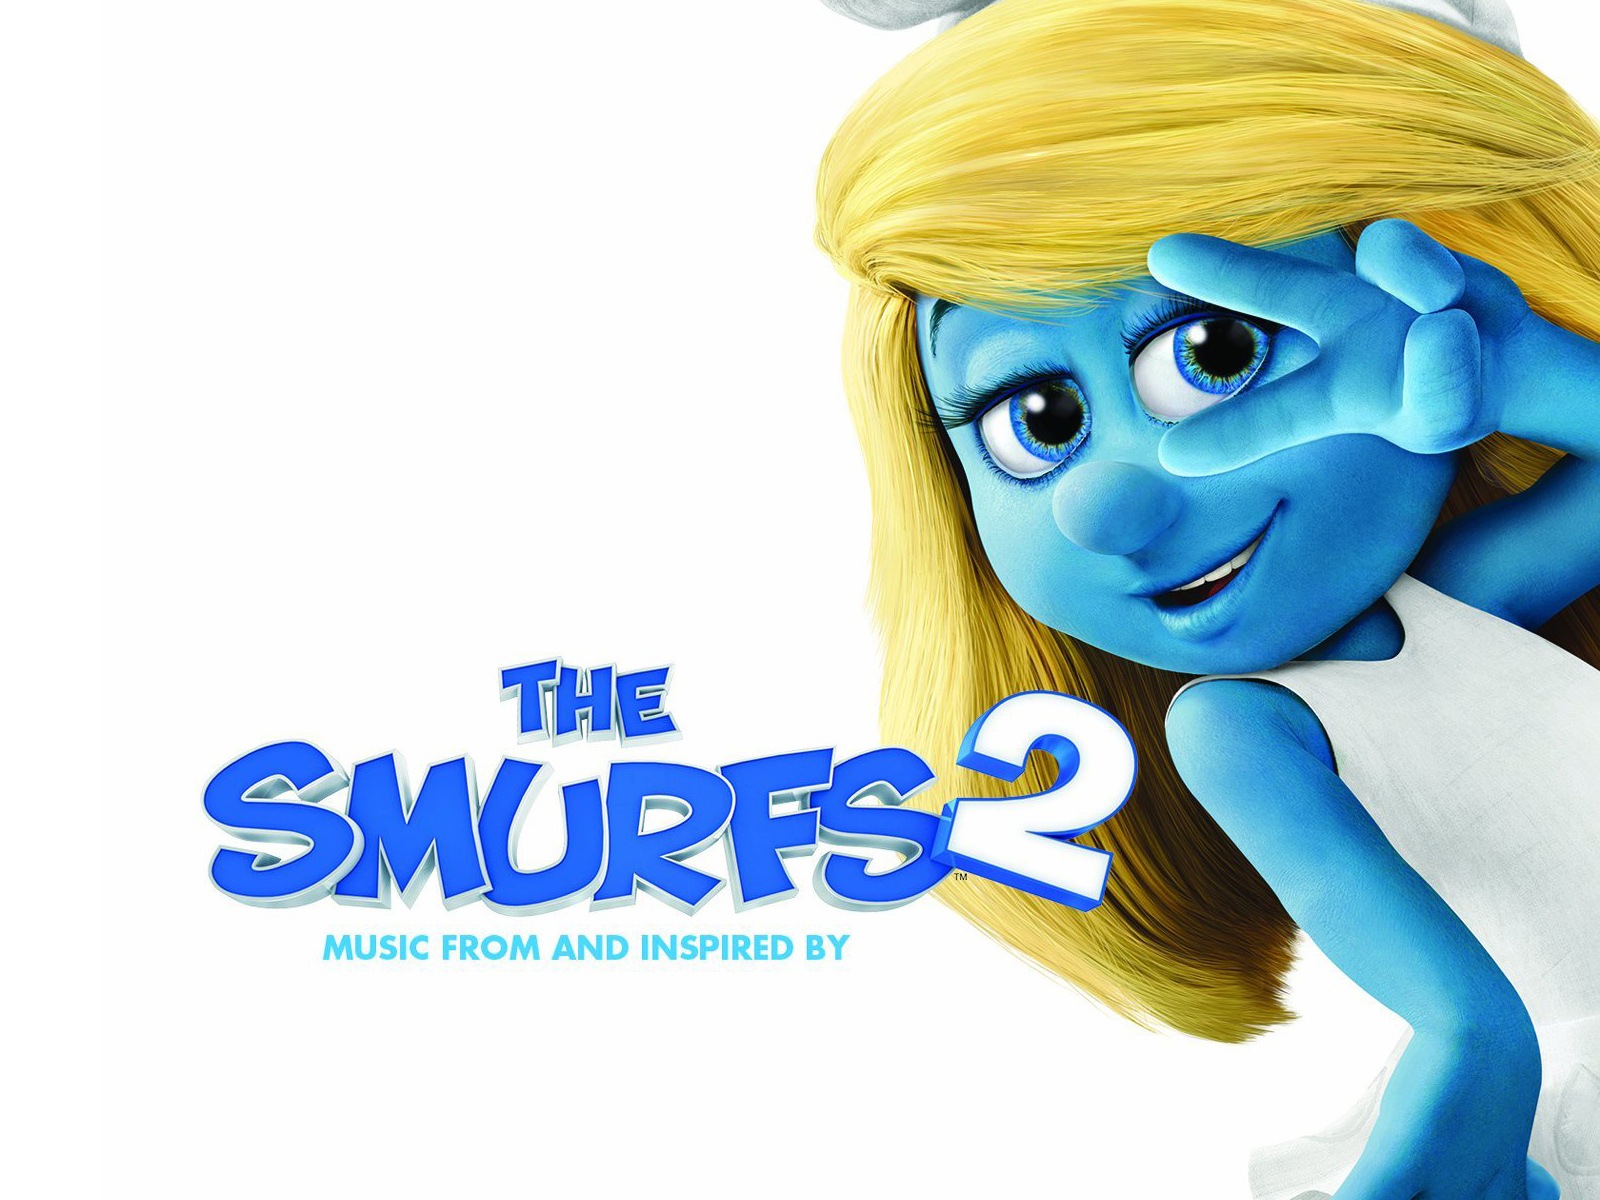 The Smurfs 2 HD movie wallpapers #4 - 1600x1200